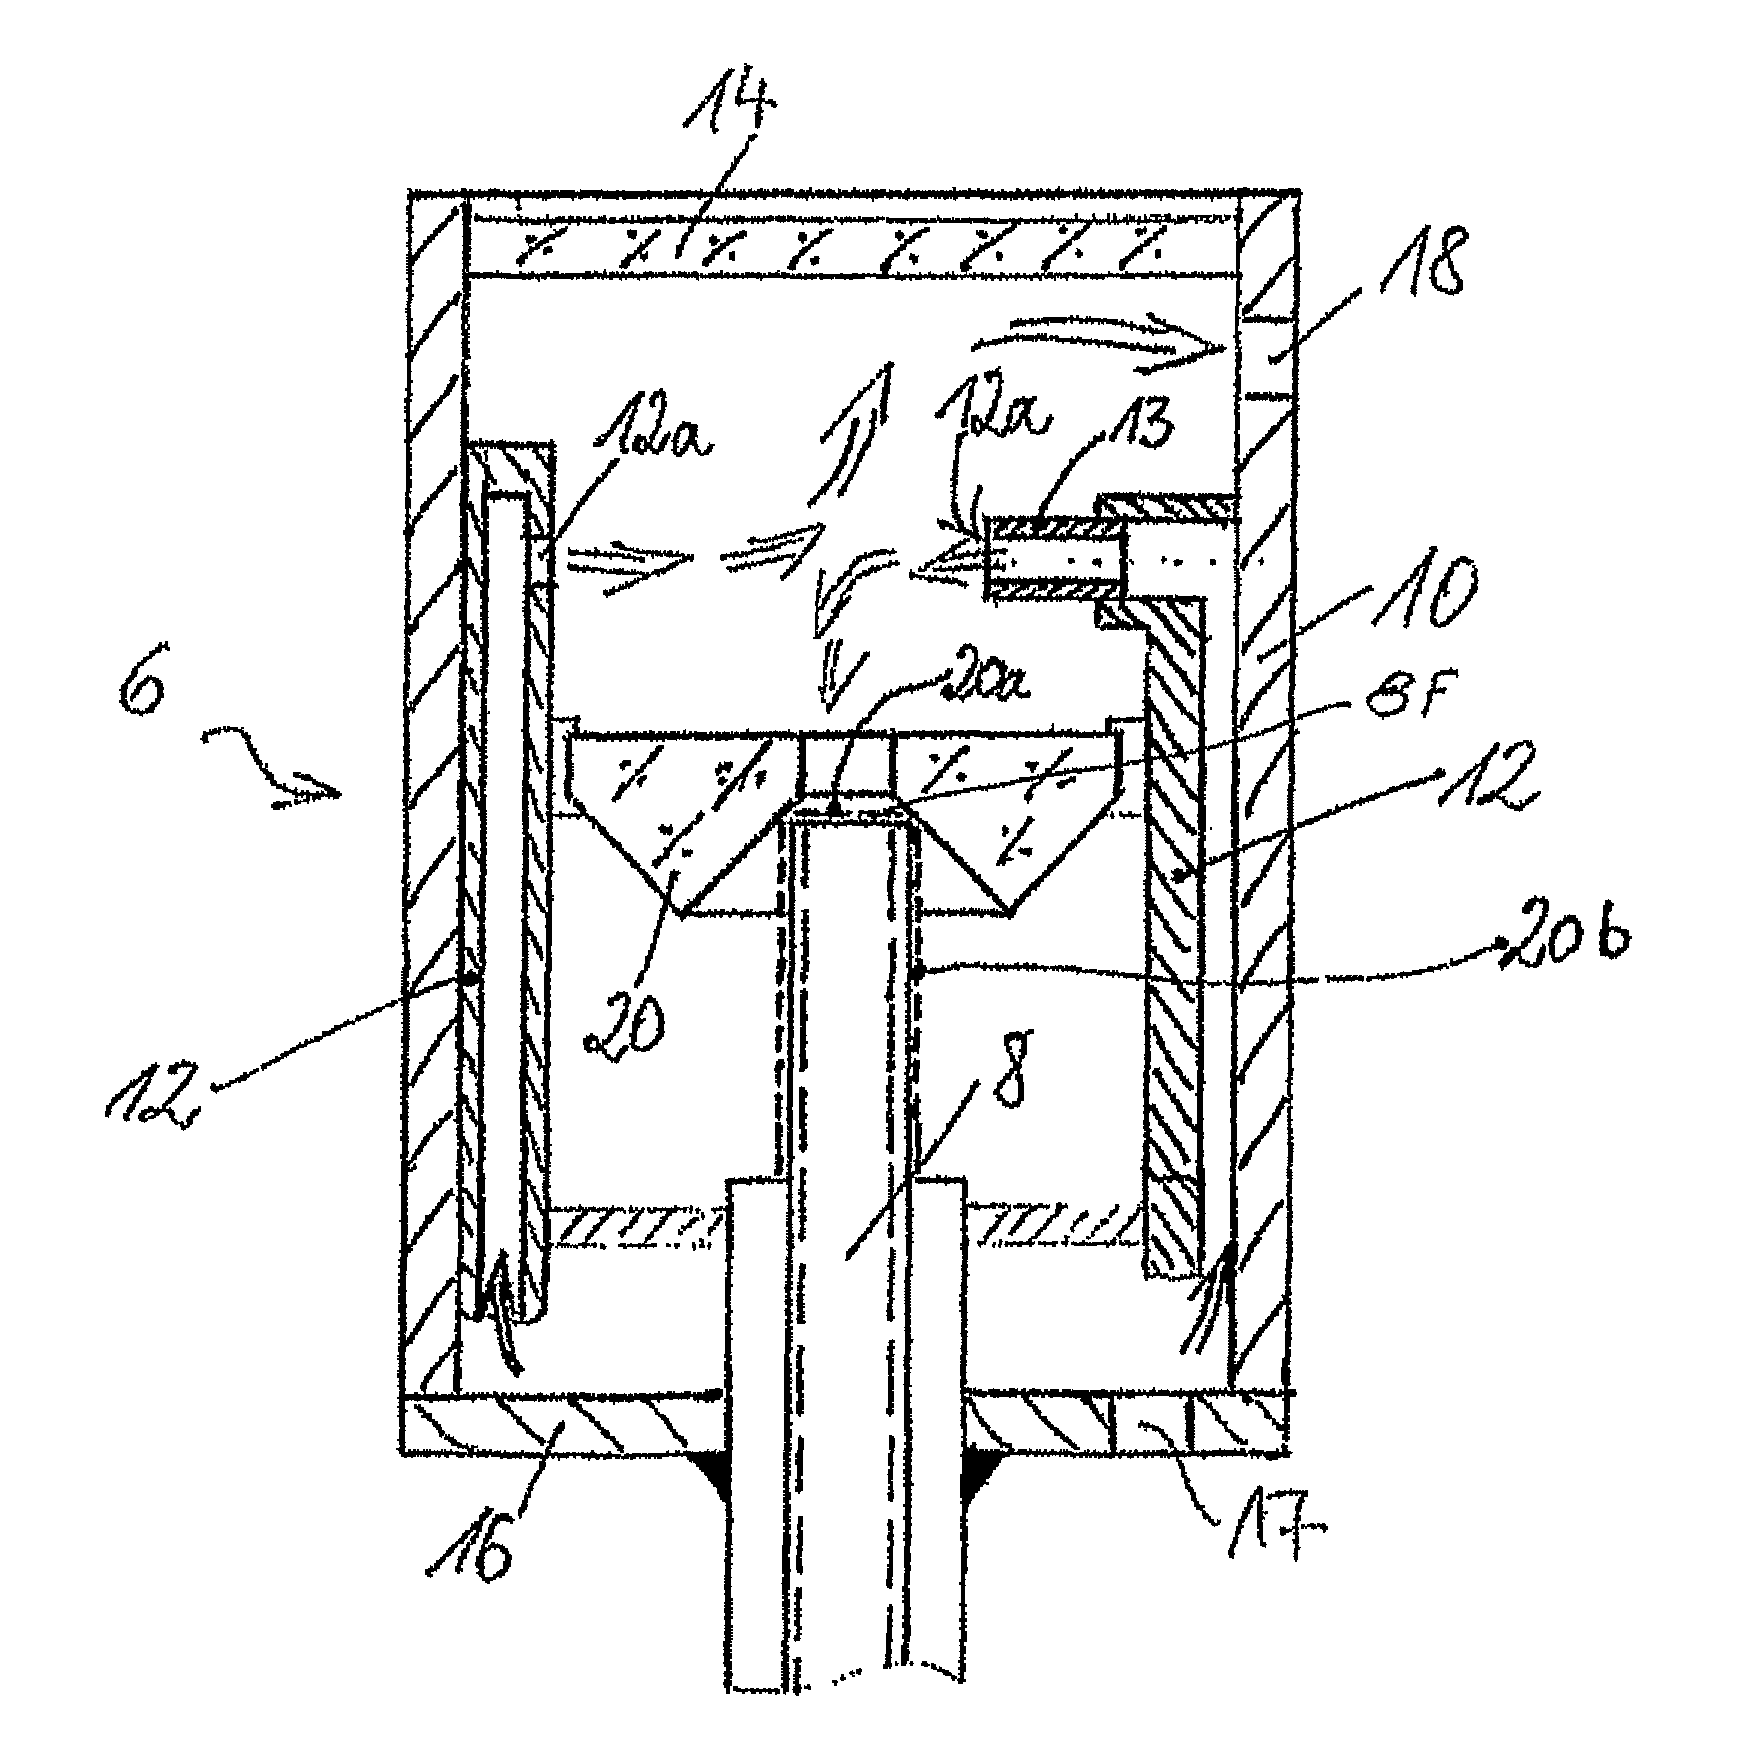 Air-cooled plug part for an optical waveguide